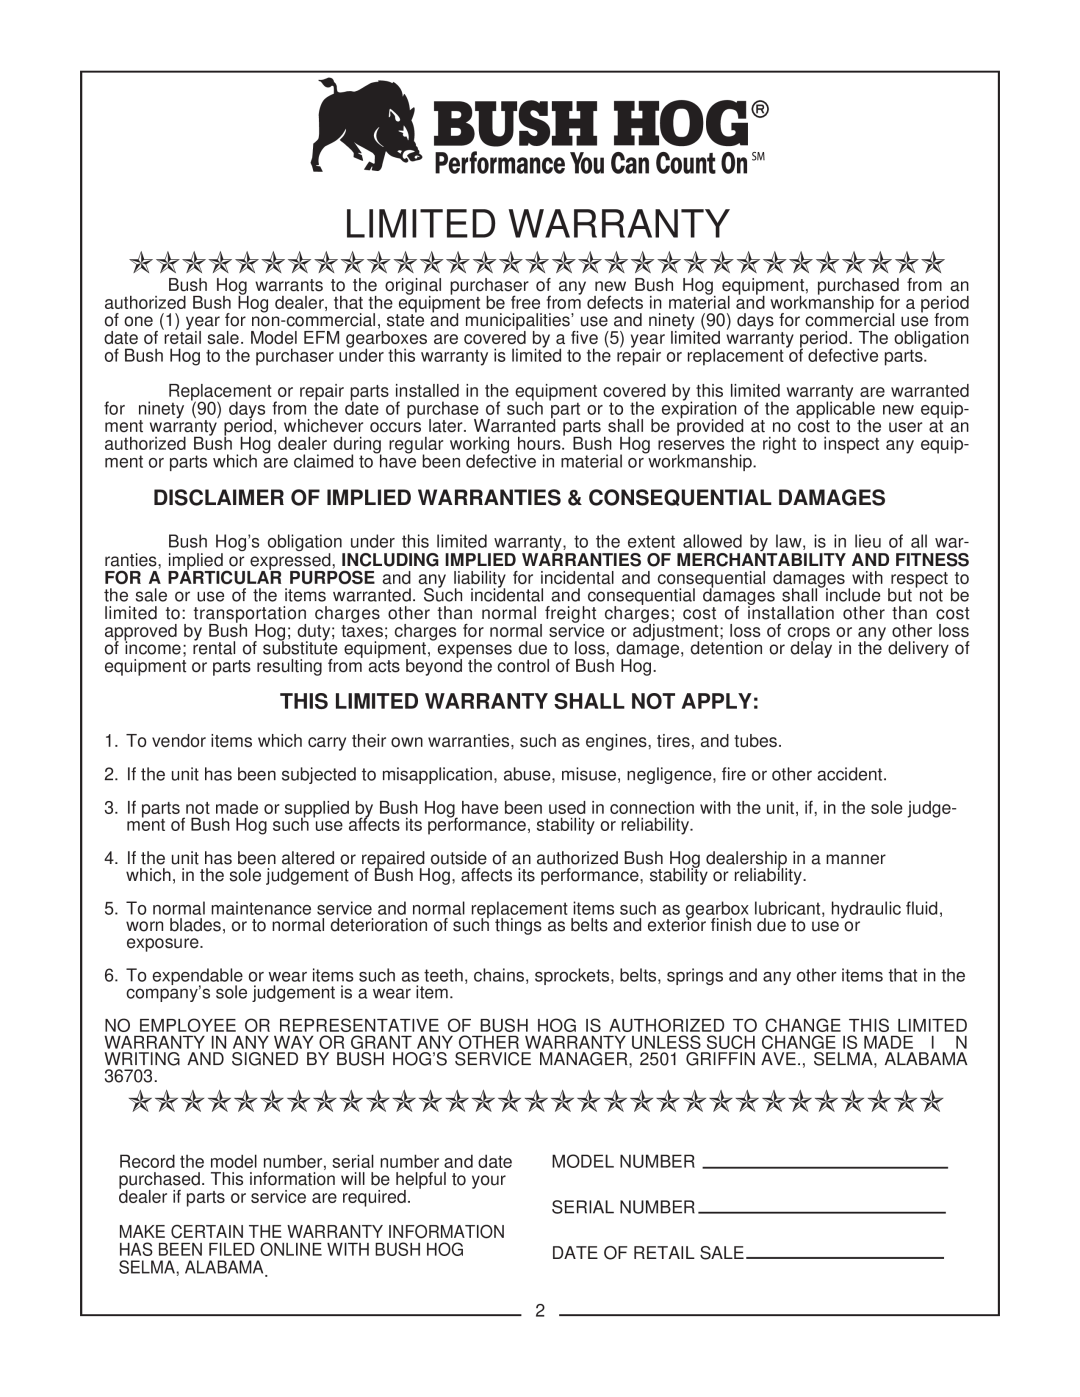 Bush Hog EFM 480/600 manual Ooooooooooooooooooooooooooooooo, This Limited Warranty Shall Not Apply 